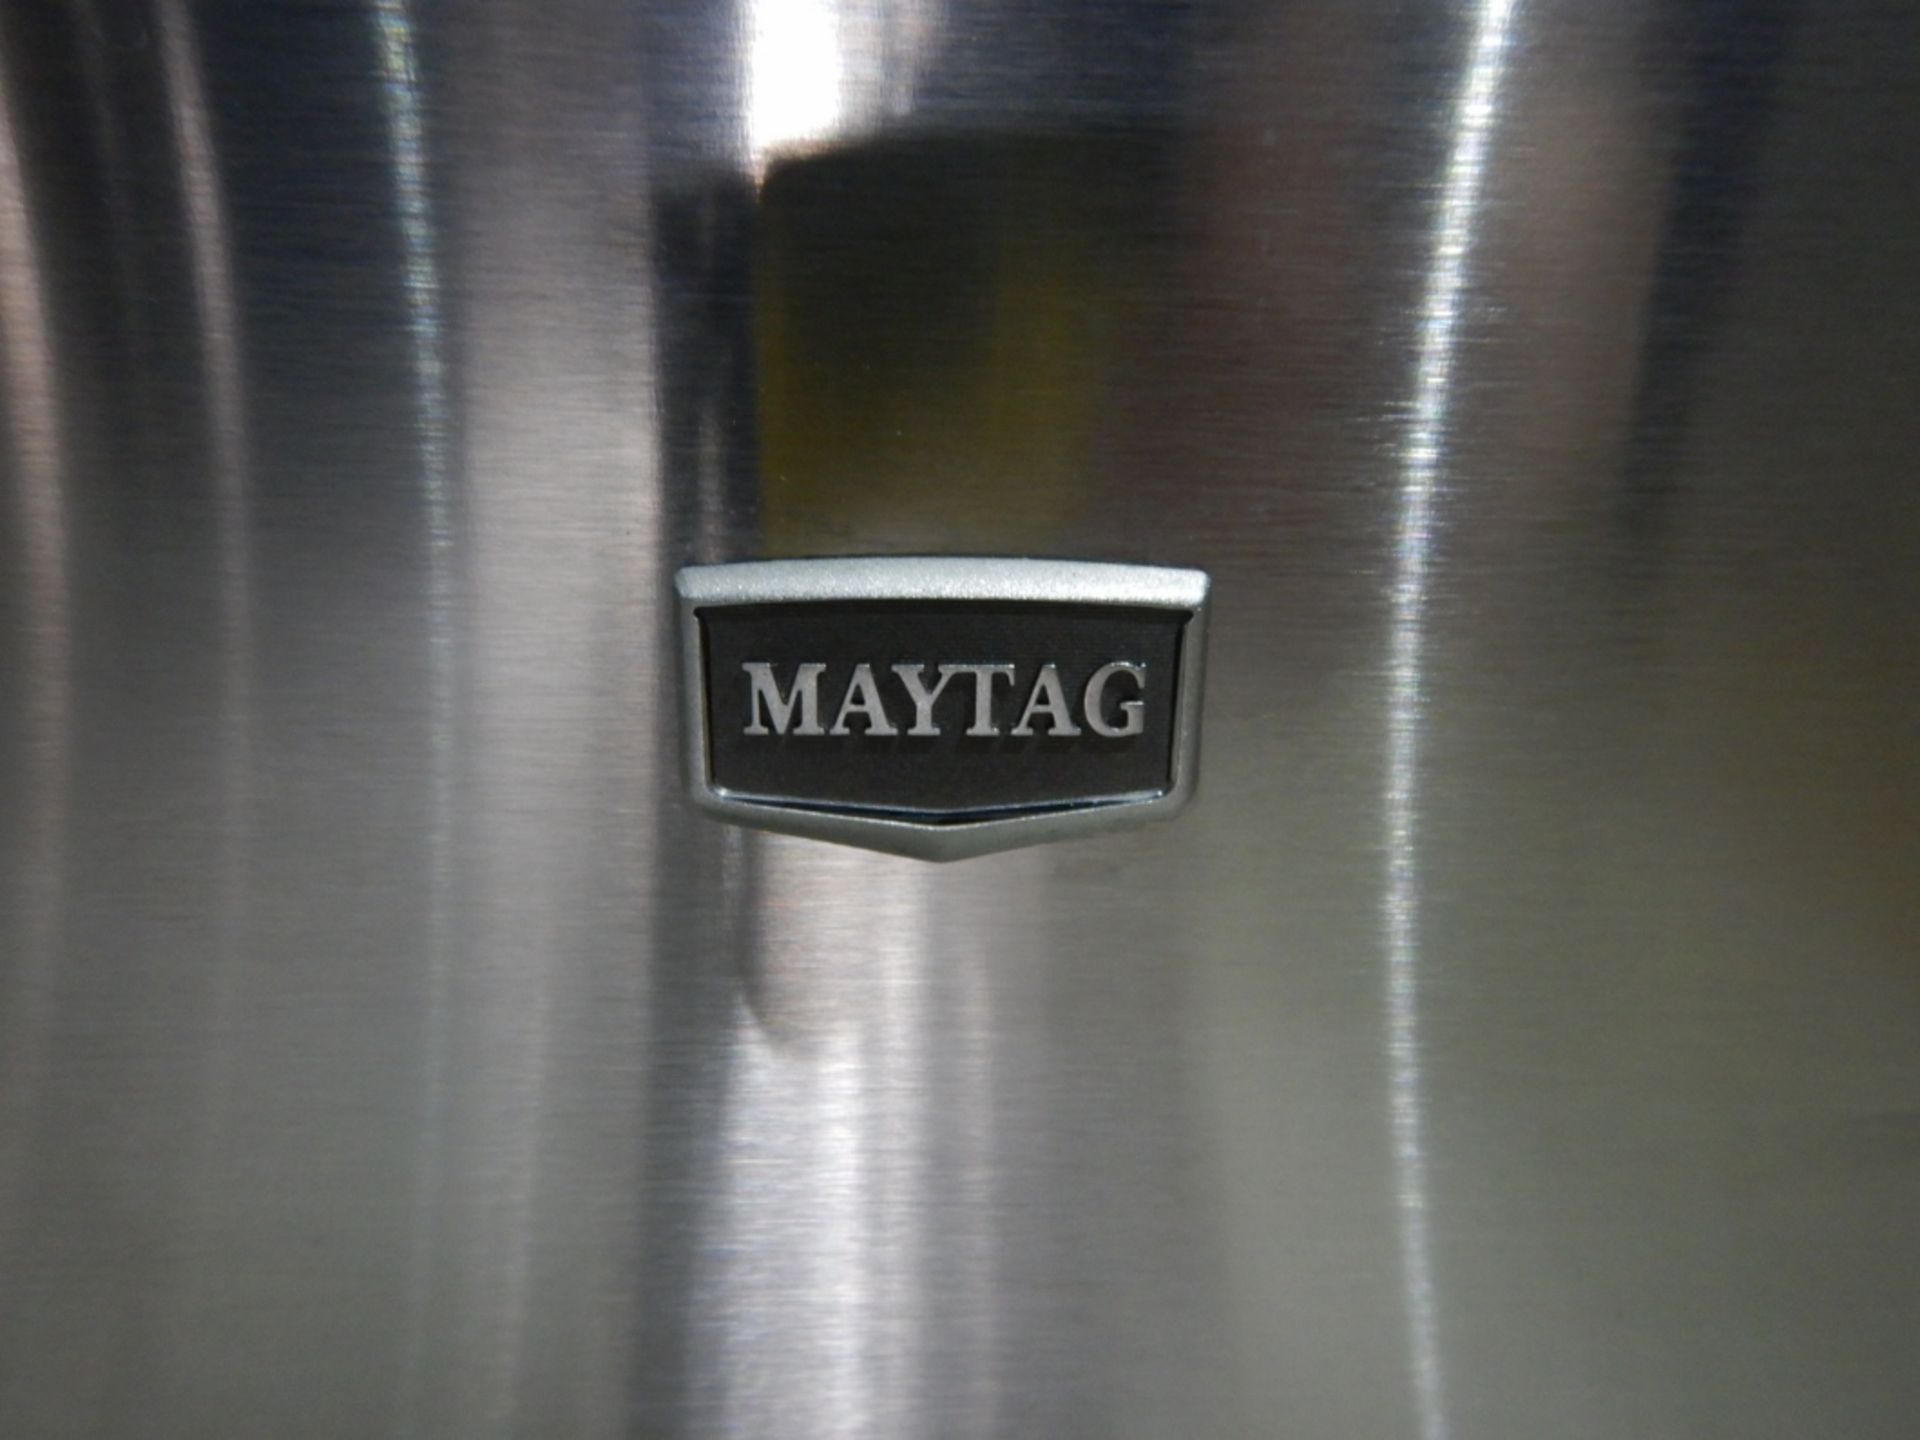 MAYTAG STAINLESS STEEL DOMESTIC UNDER COUNTER DISHWASHER, MODEL #MDBH949PAM1, S/N F24202593, TYPE - Image 4 of 6